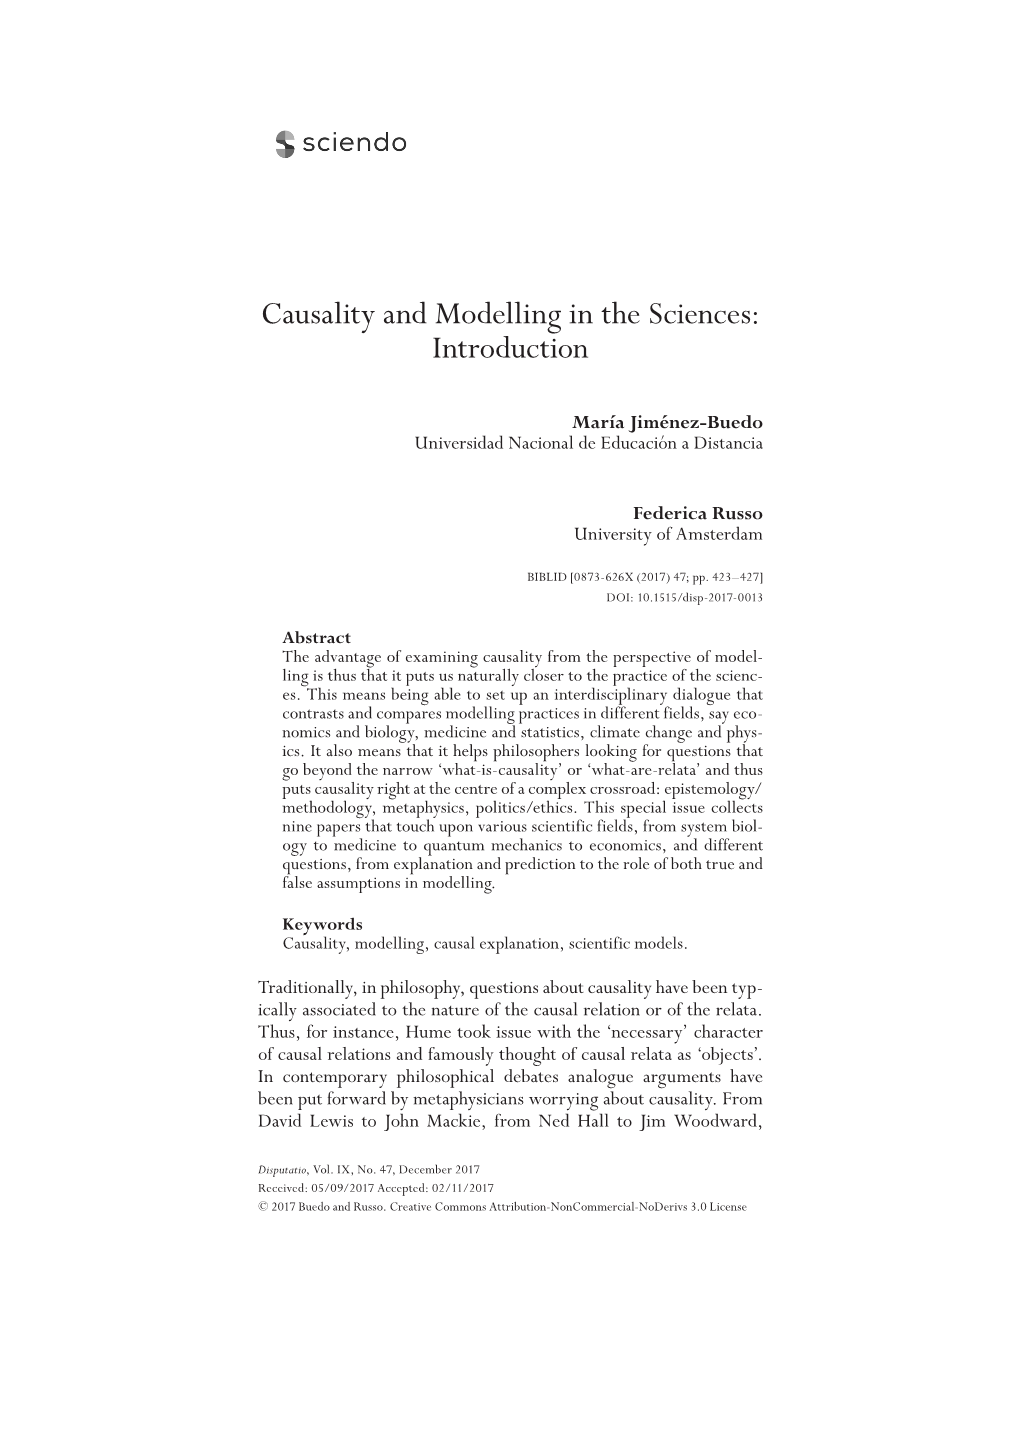 Causality and Modelling in the Sciences: Introduction